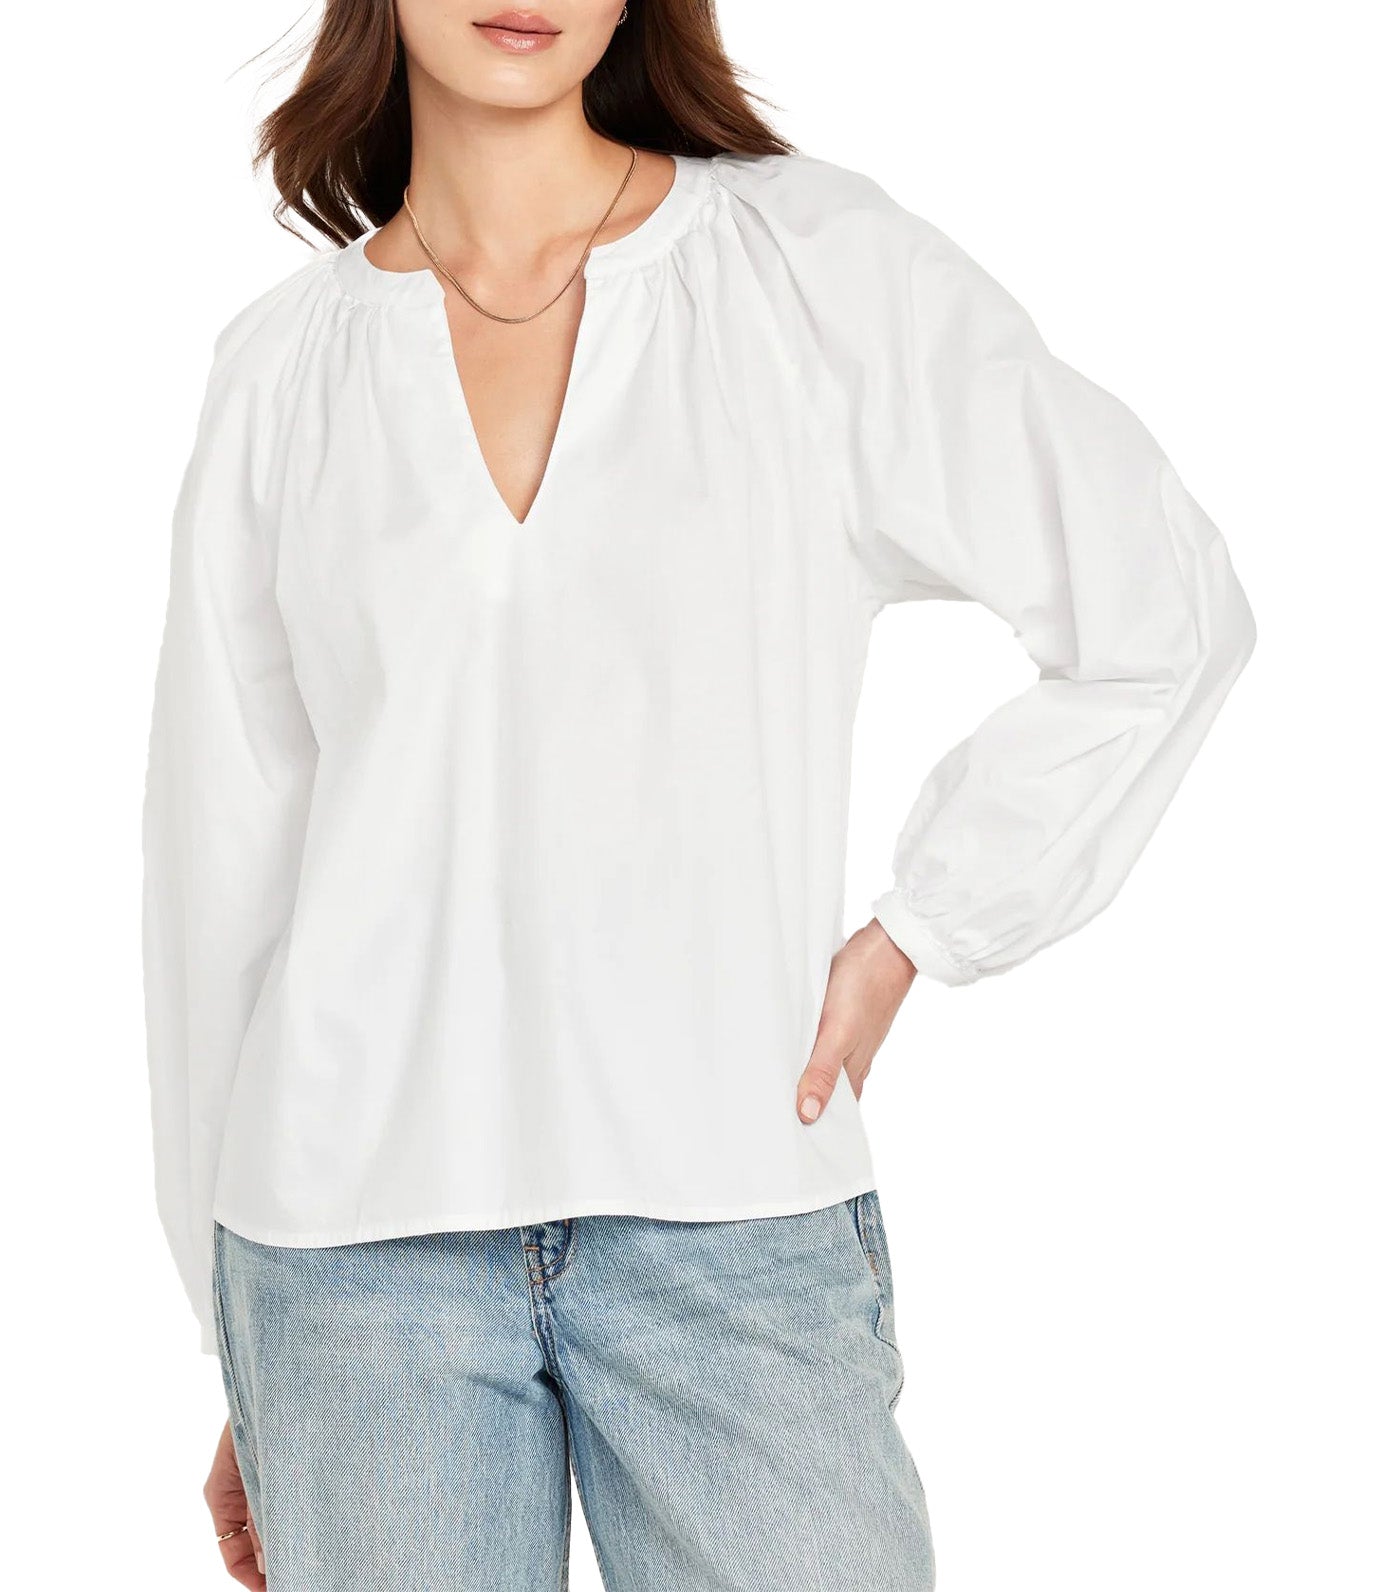 Long-Sleeve Split-Neck Top for Women Calla Lily 451